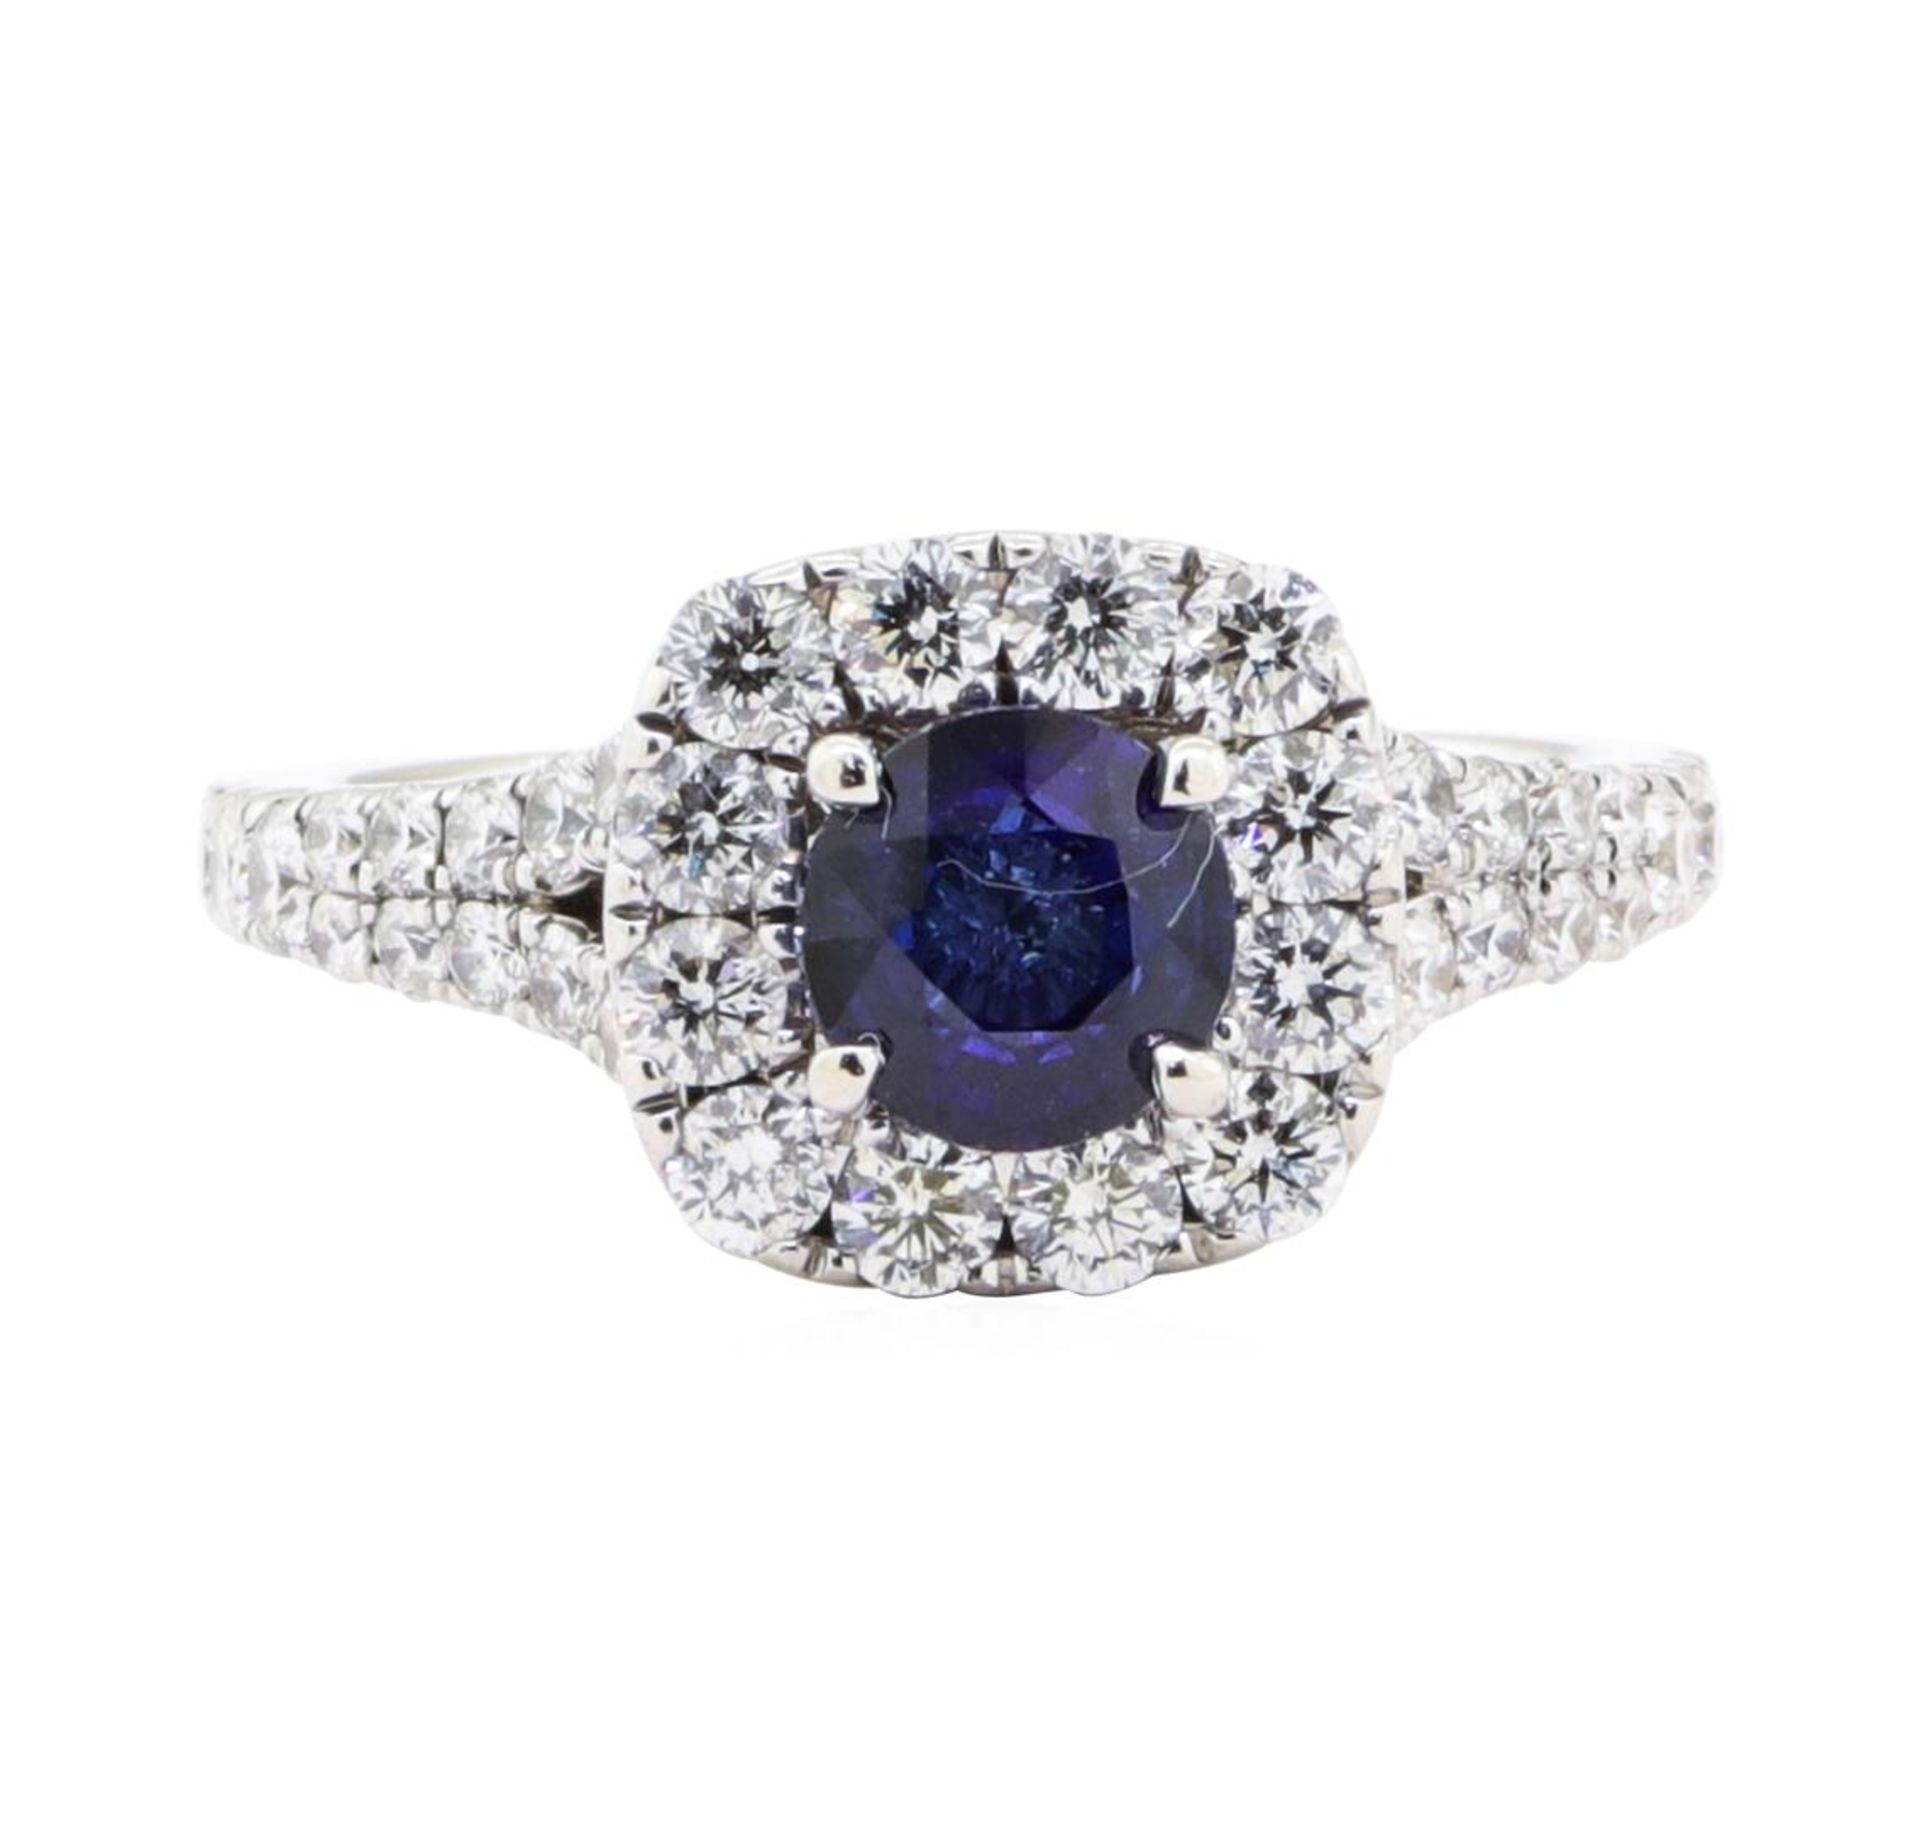 2.20 ctw Sapphire And Diamond Ring - 14KT White Gold - Image 2 of 6